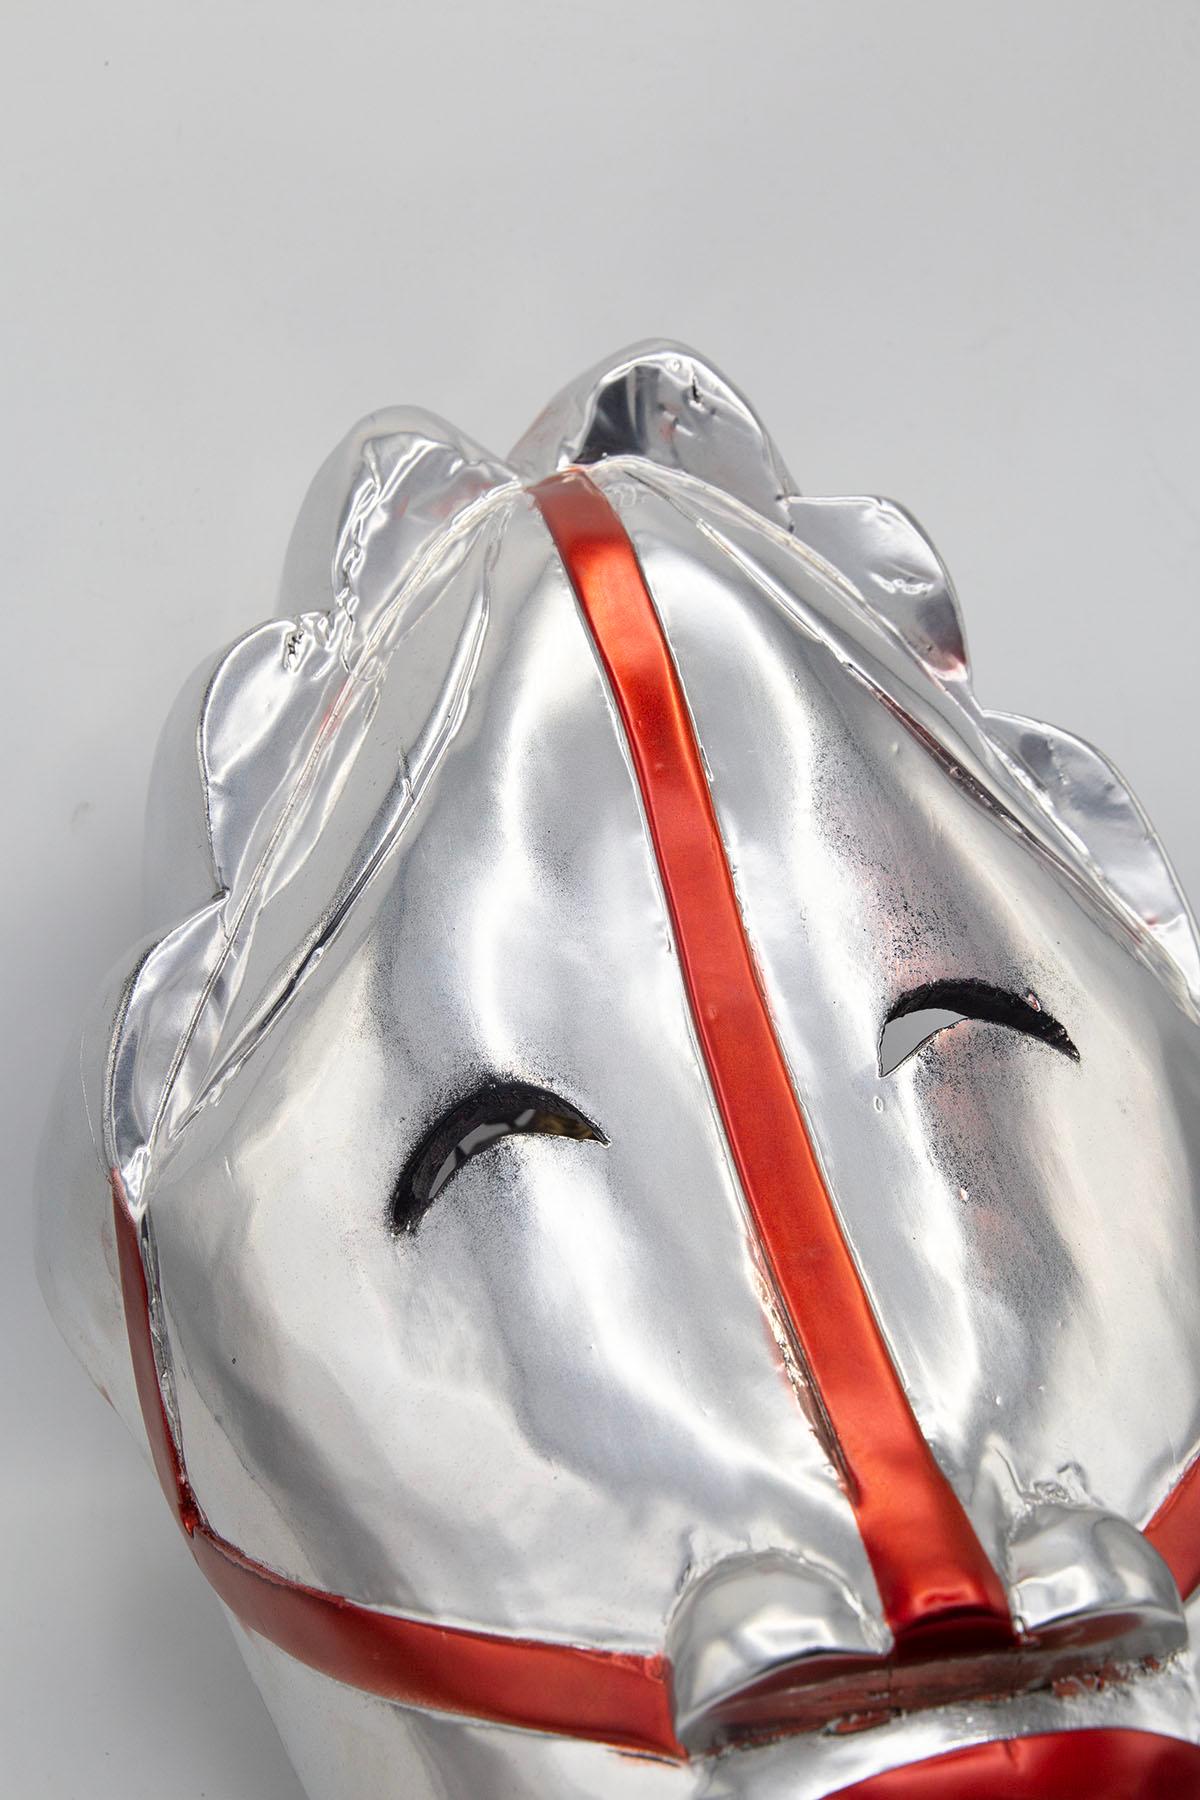 Wood African Futurist Silver Mask Created by Bomber Bax For Sale